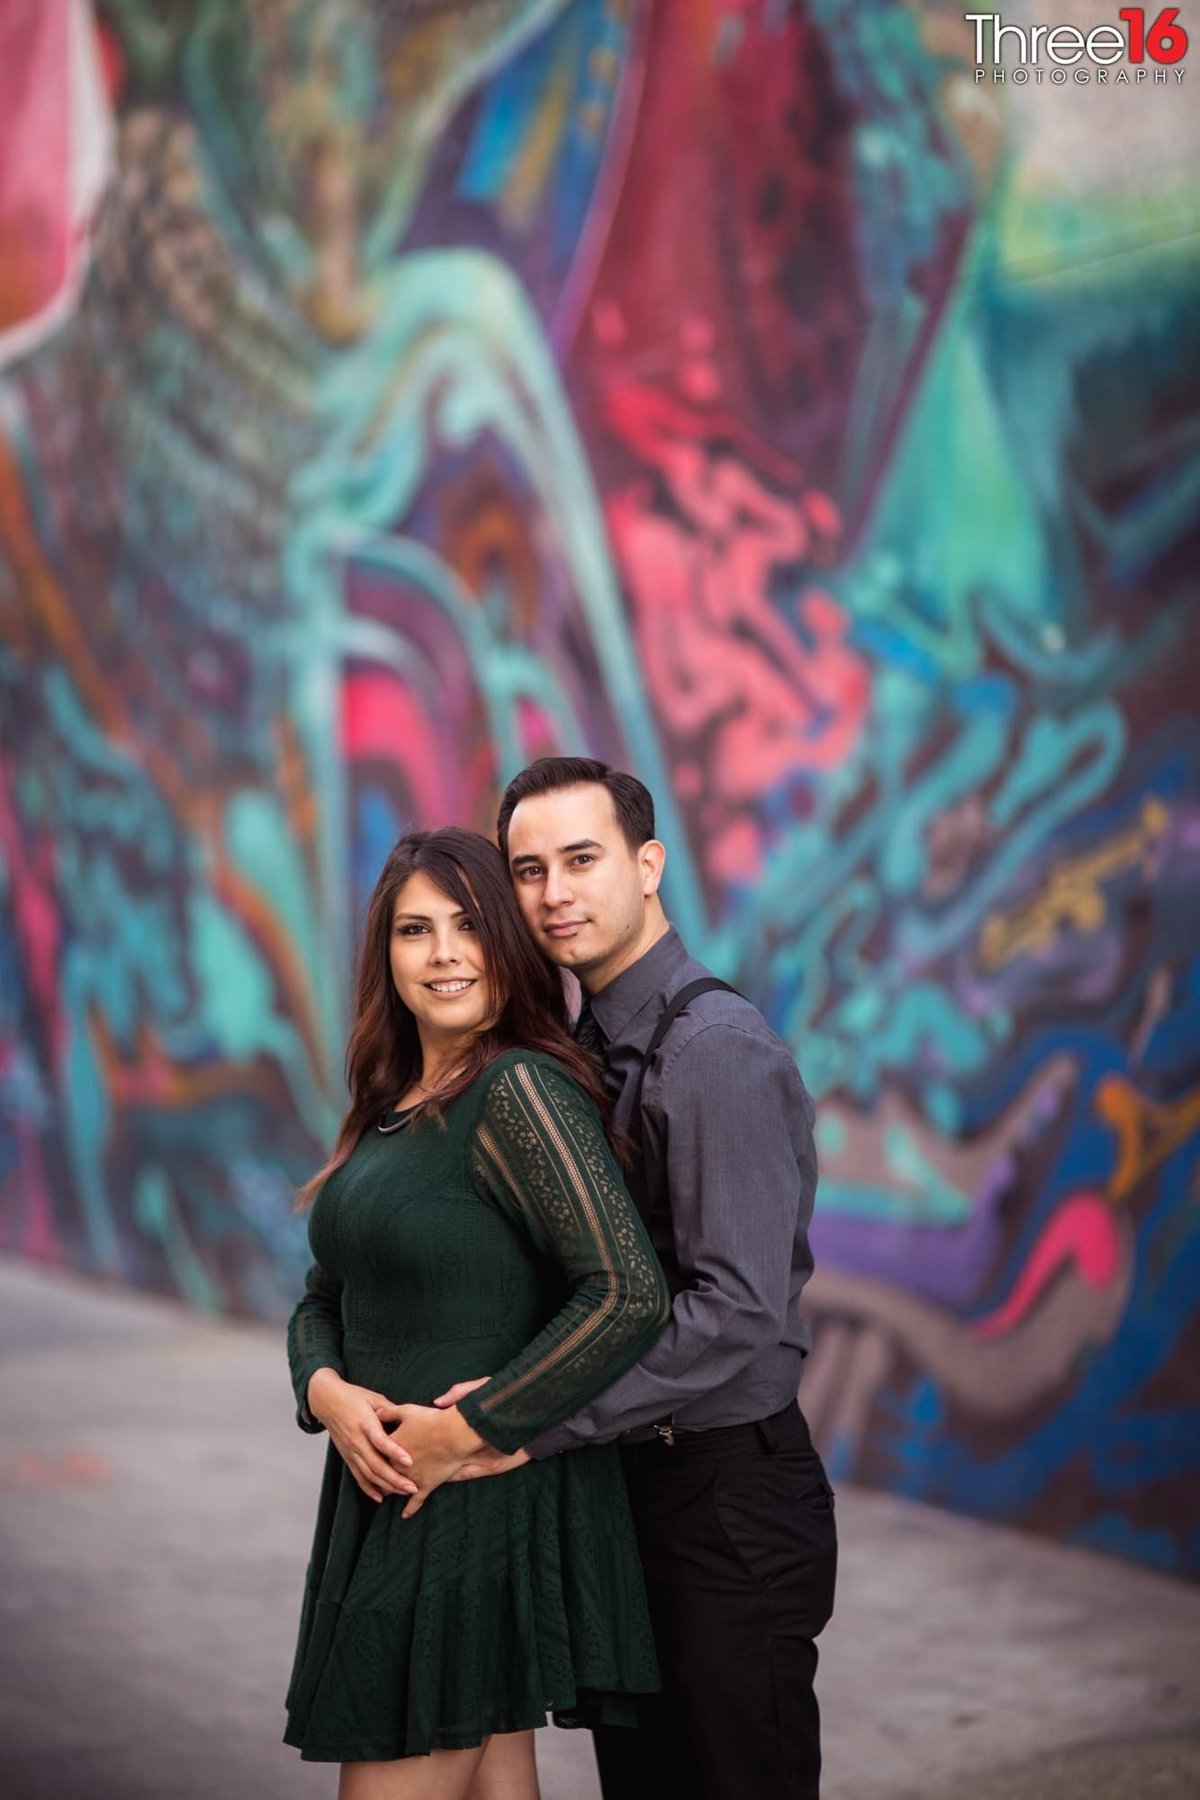 Groom to be embraces his fiance from behind in front of a colorful mural on a wall